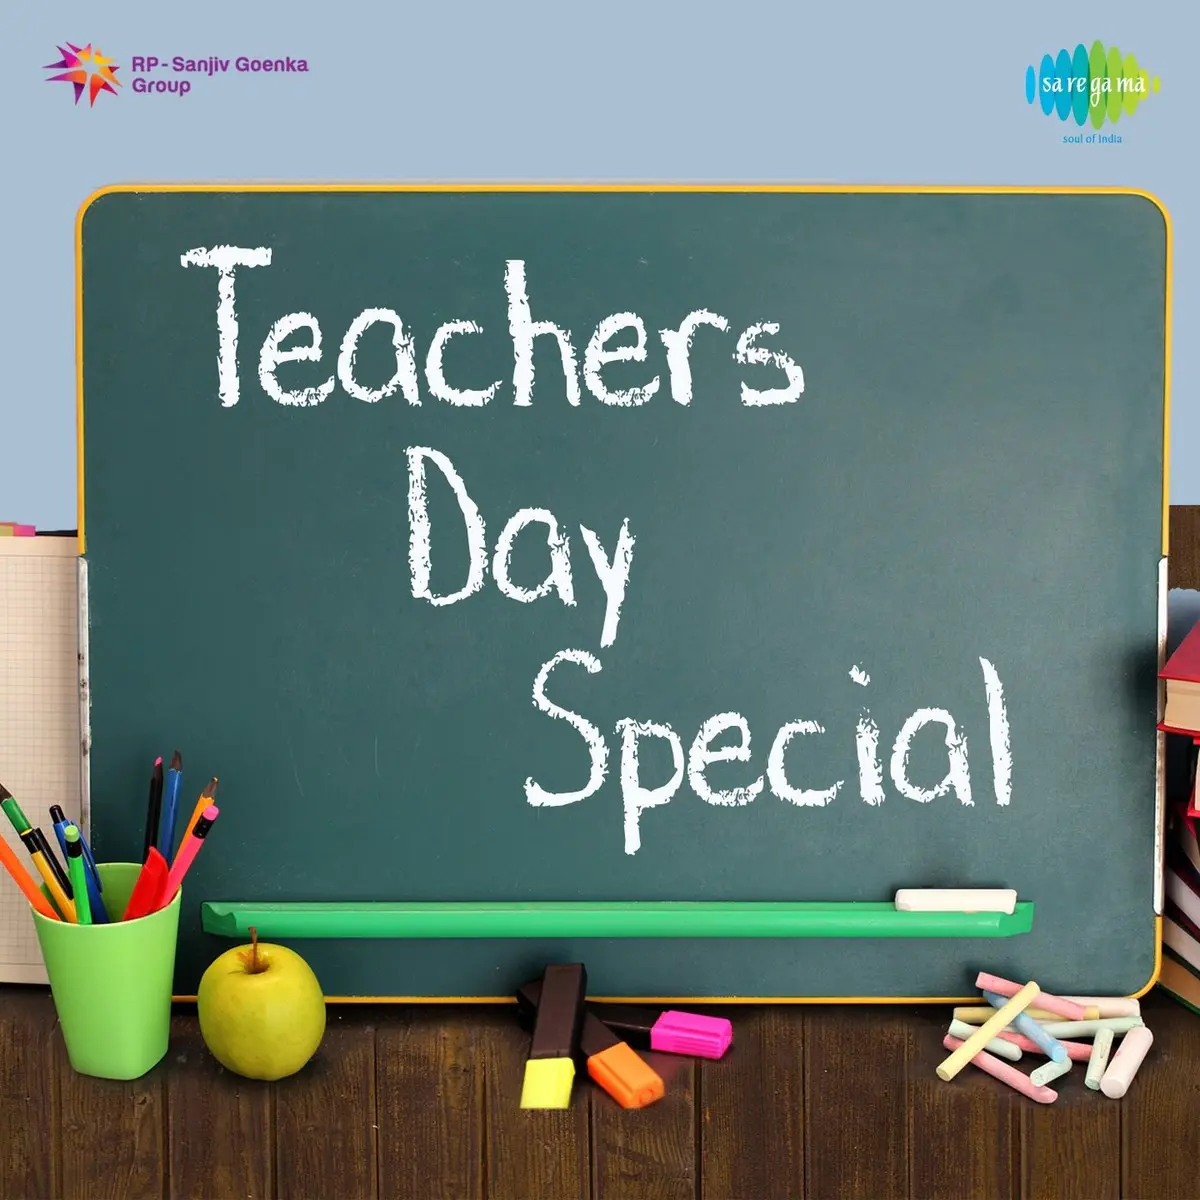 Teachers Day Special Songs Download Teachers Day Mp3 Songs Online Free On Gaana Com Findikci mp3 songs free download, download mp4 original audio soundtrack mp3 songs acd rips free. teachers day special songs download